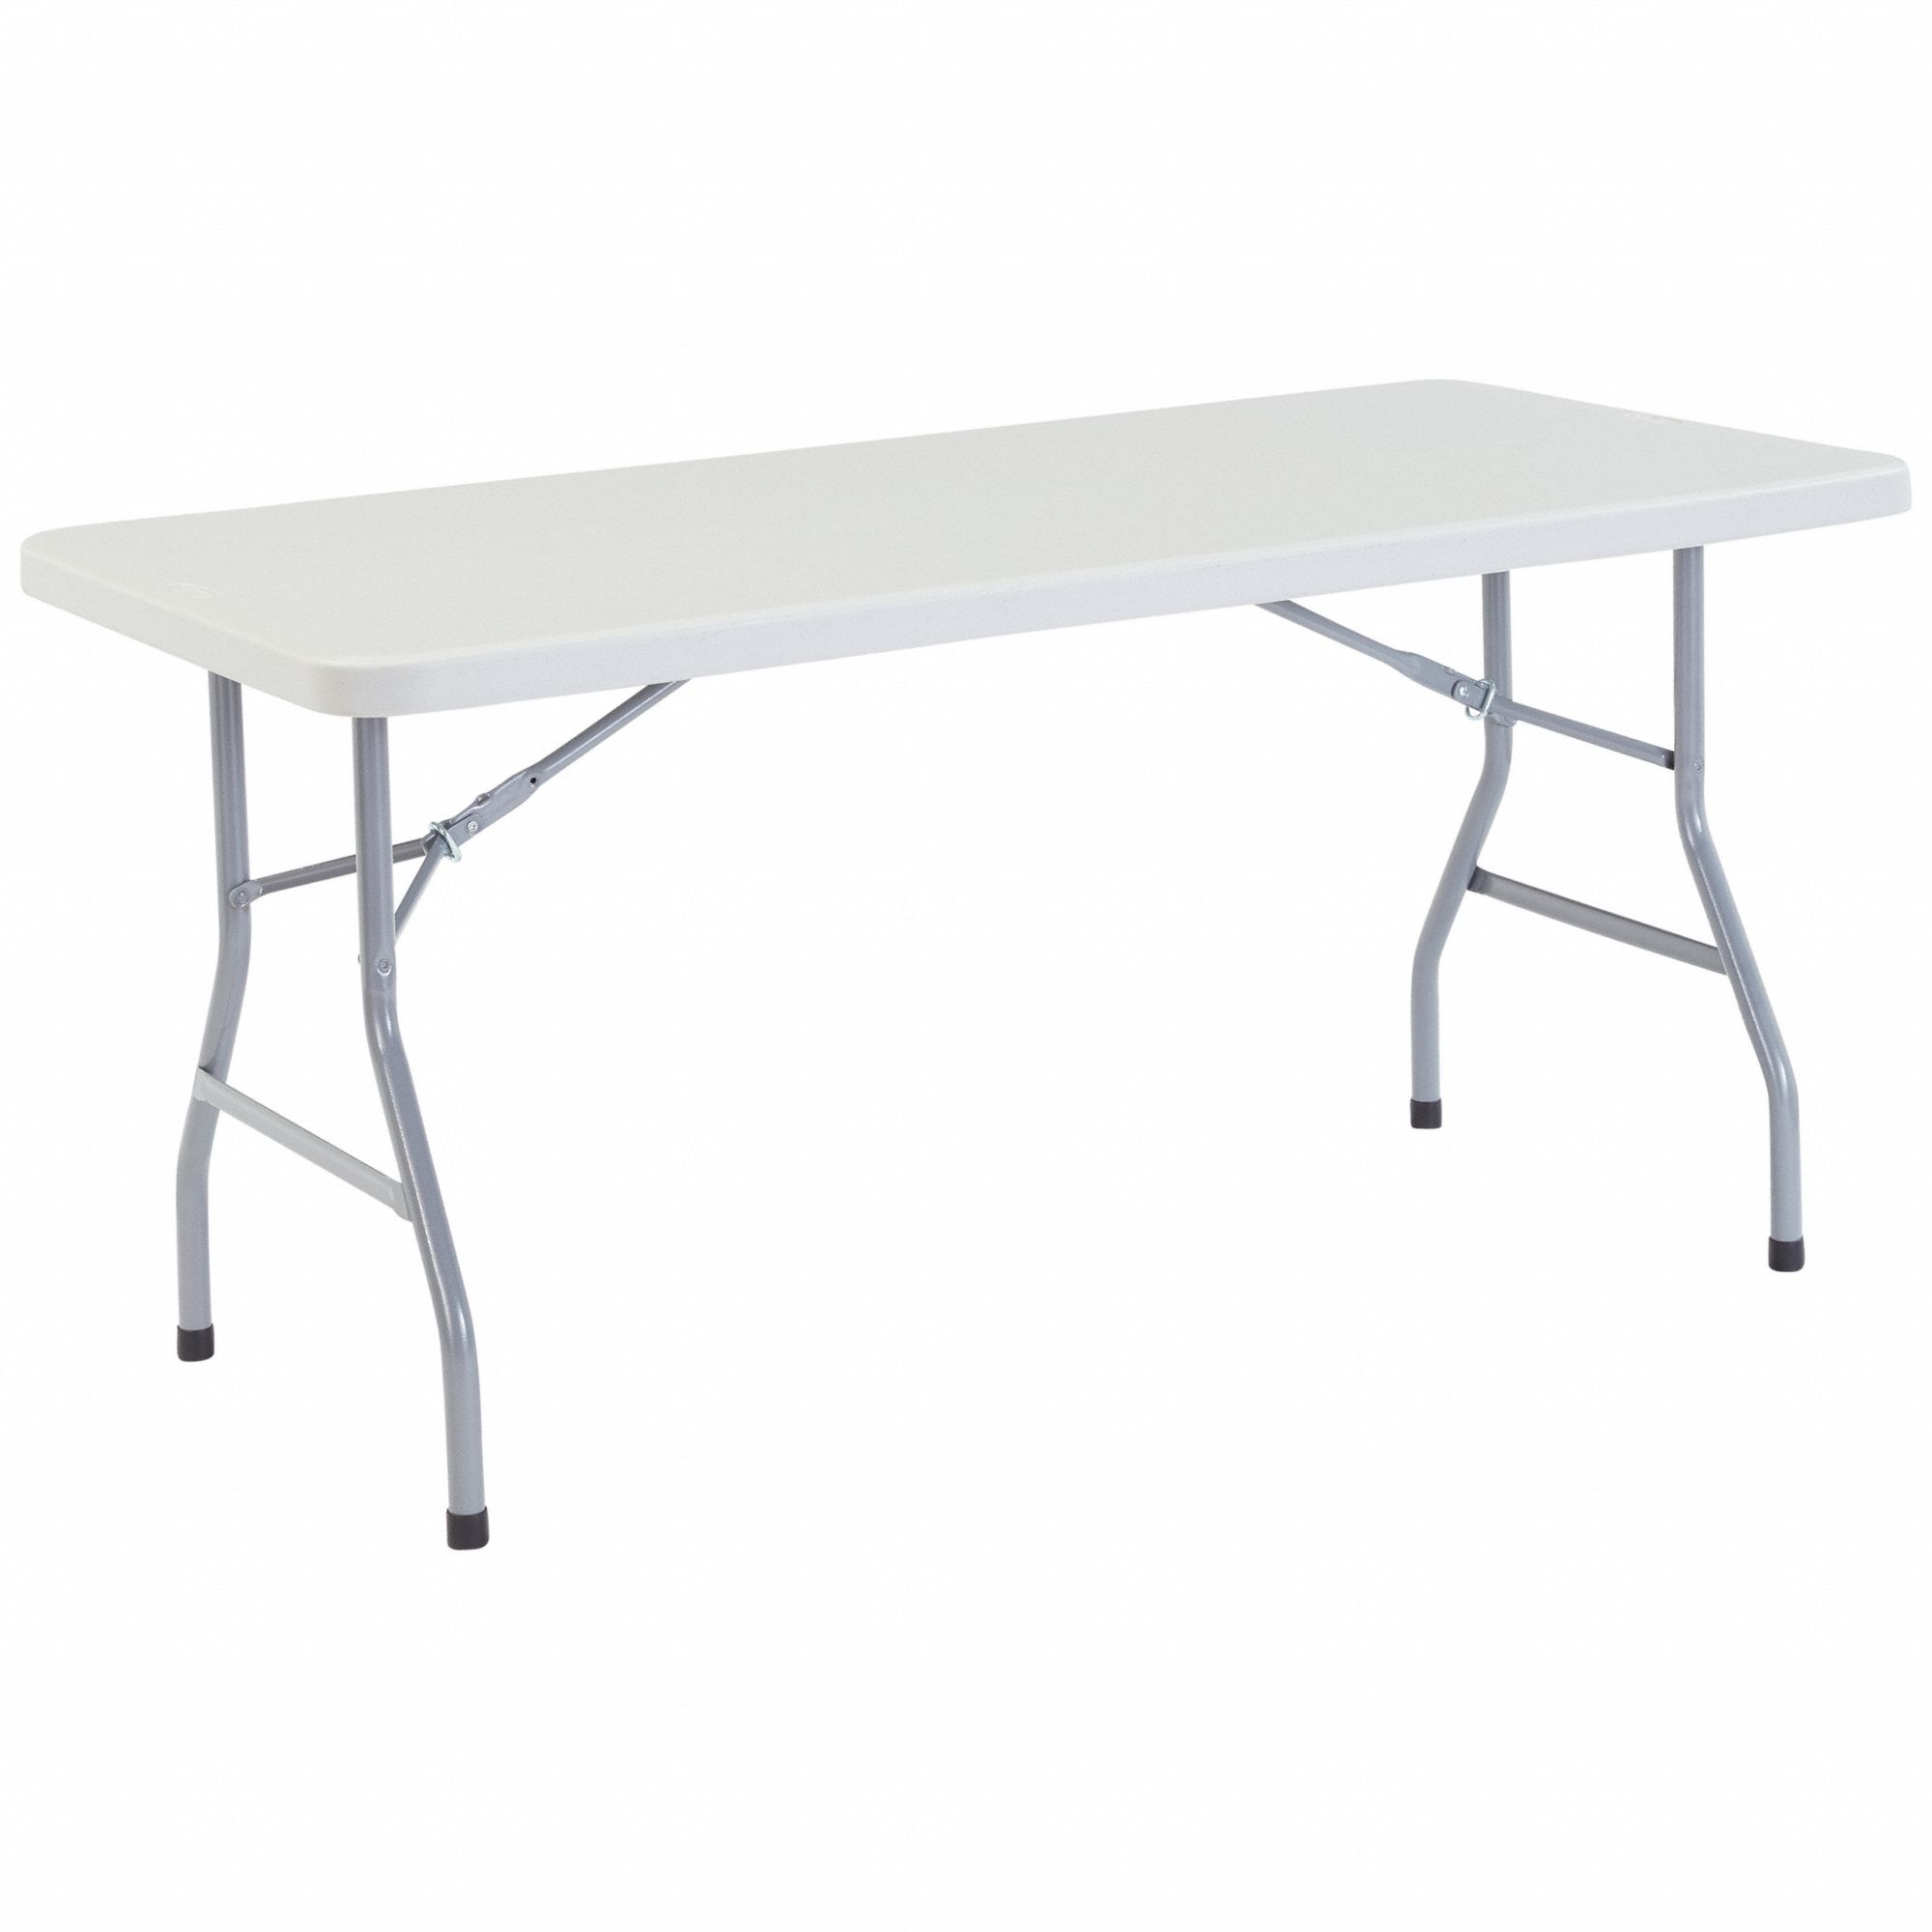 NATIONAL PUBLIC SEATING, 30 in Wd, 60 in Lg, Folding Table - 8RMK2|BT ...